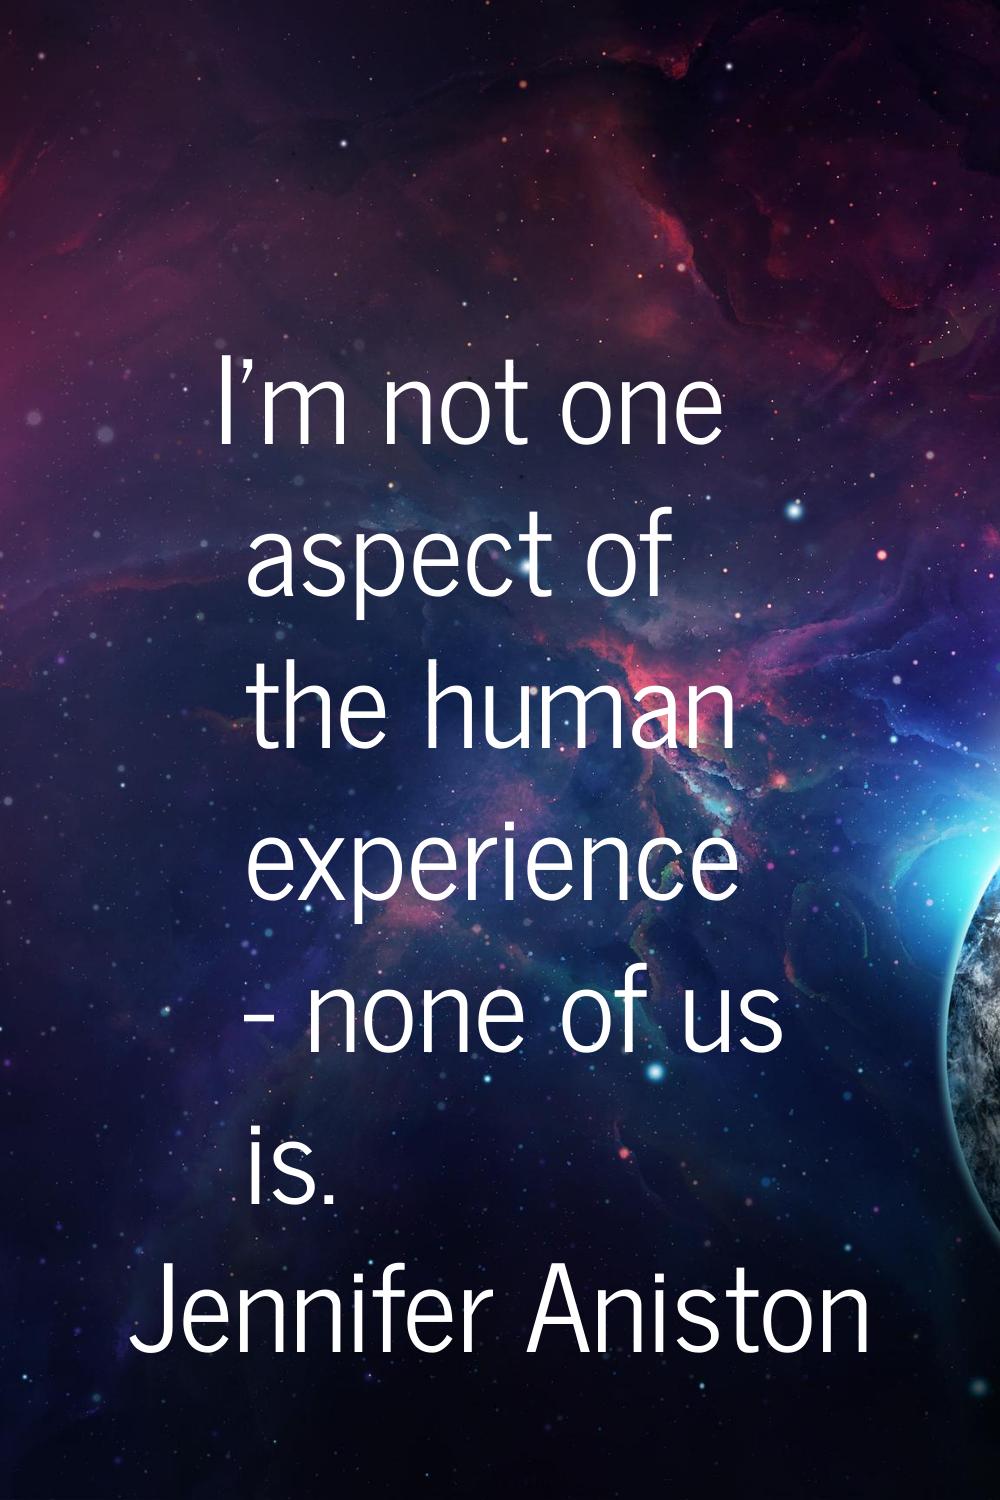 I'm not one aspect of the human experience - none of us is.